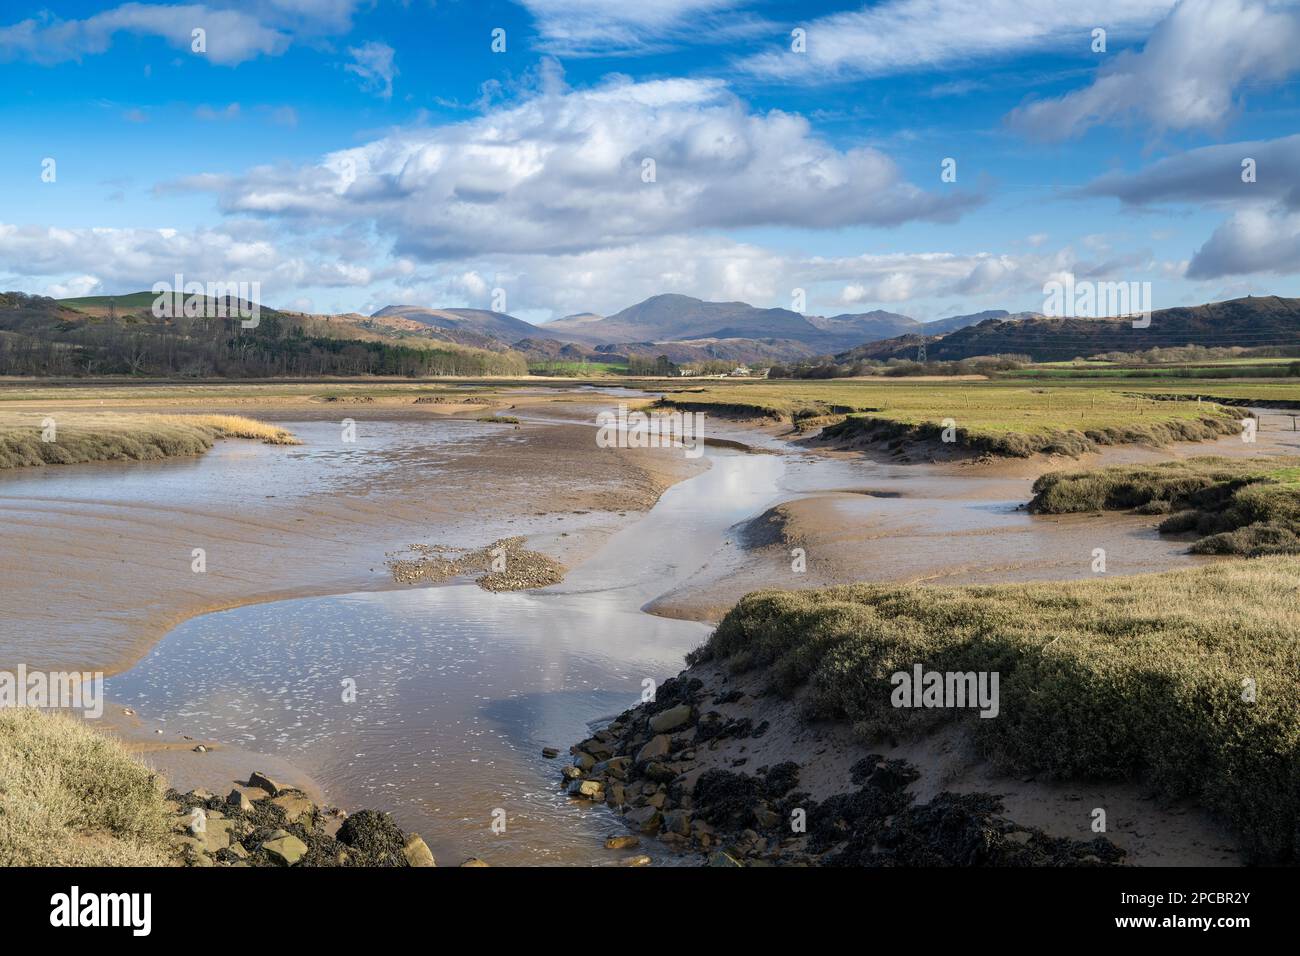 Estuary of the River Esk in Cumbria, which starts in the Scafell range of mountains in the Lake District before entering the Irish Sea near Ravenglass Stock Photo